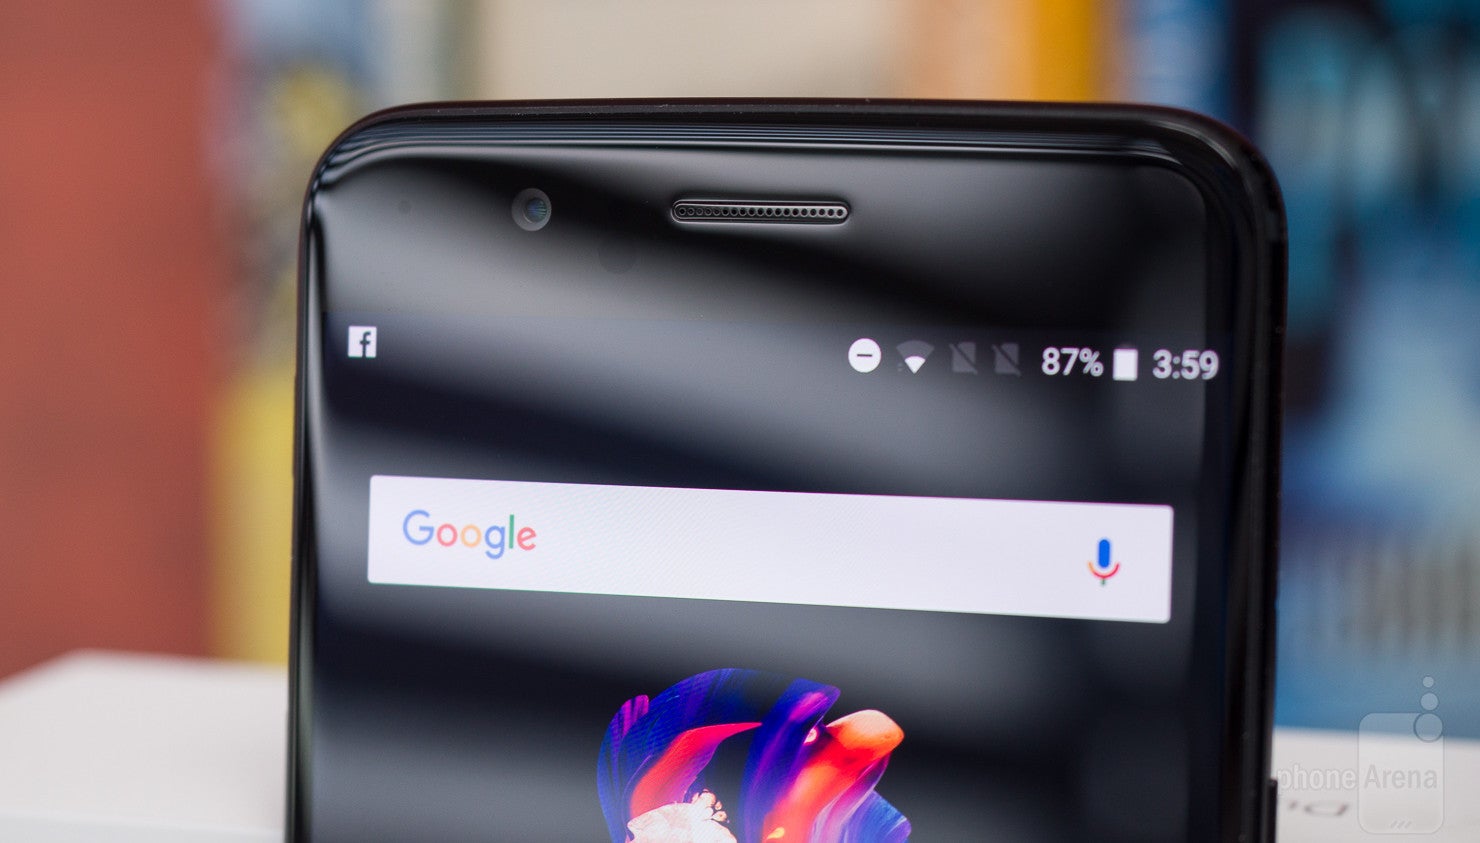 OnePlus 5T could be released in late November